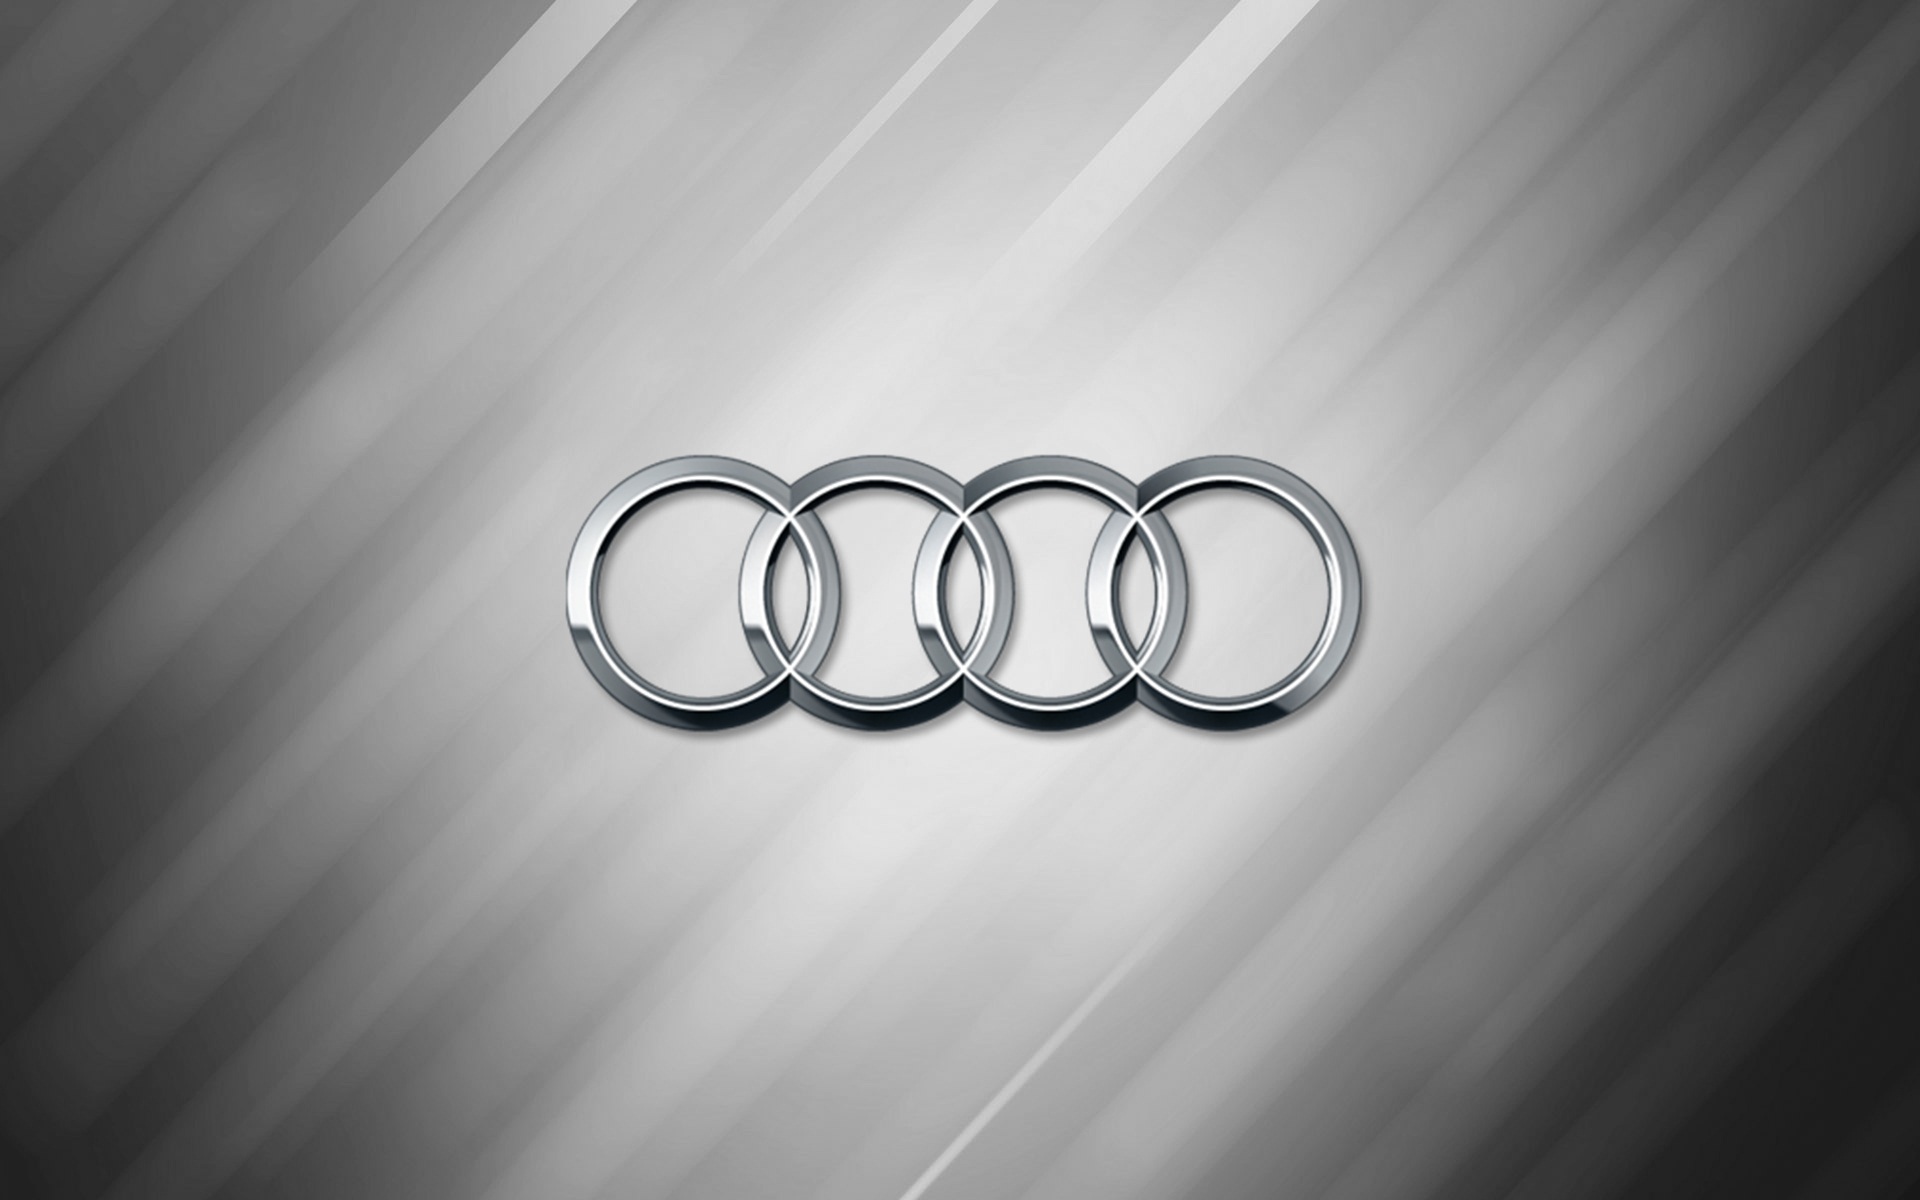 Audi Logo Wallpapers Pictures Images